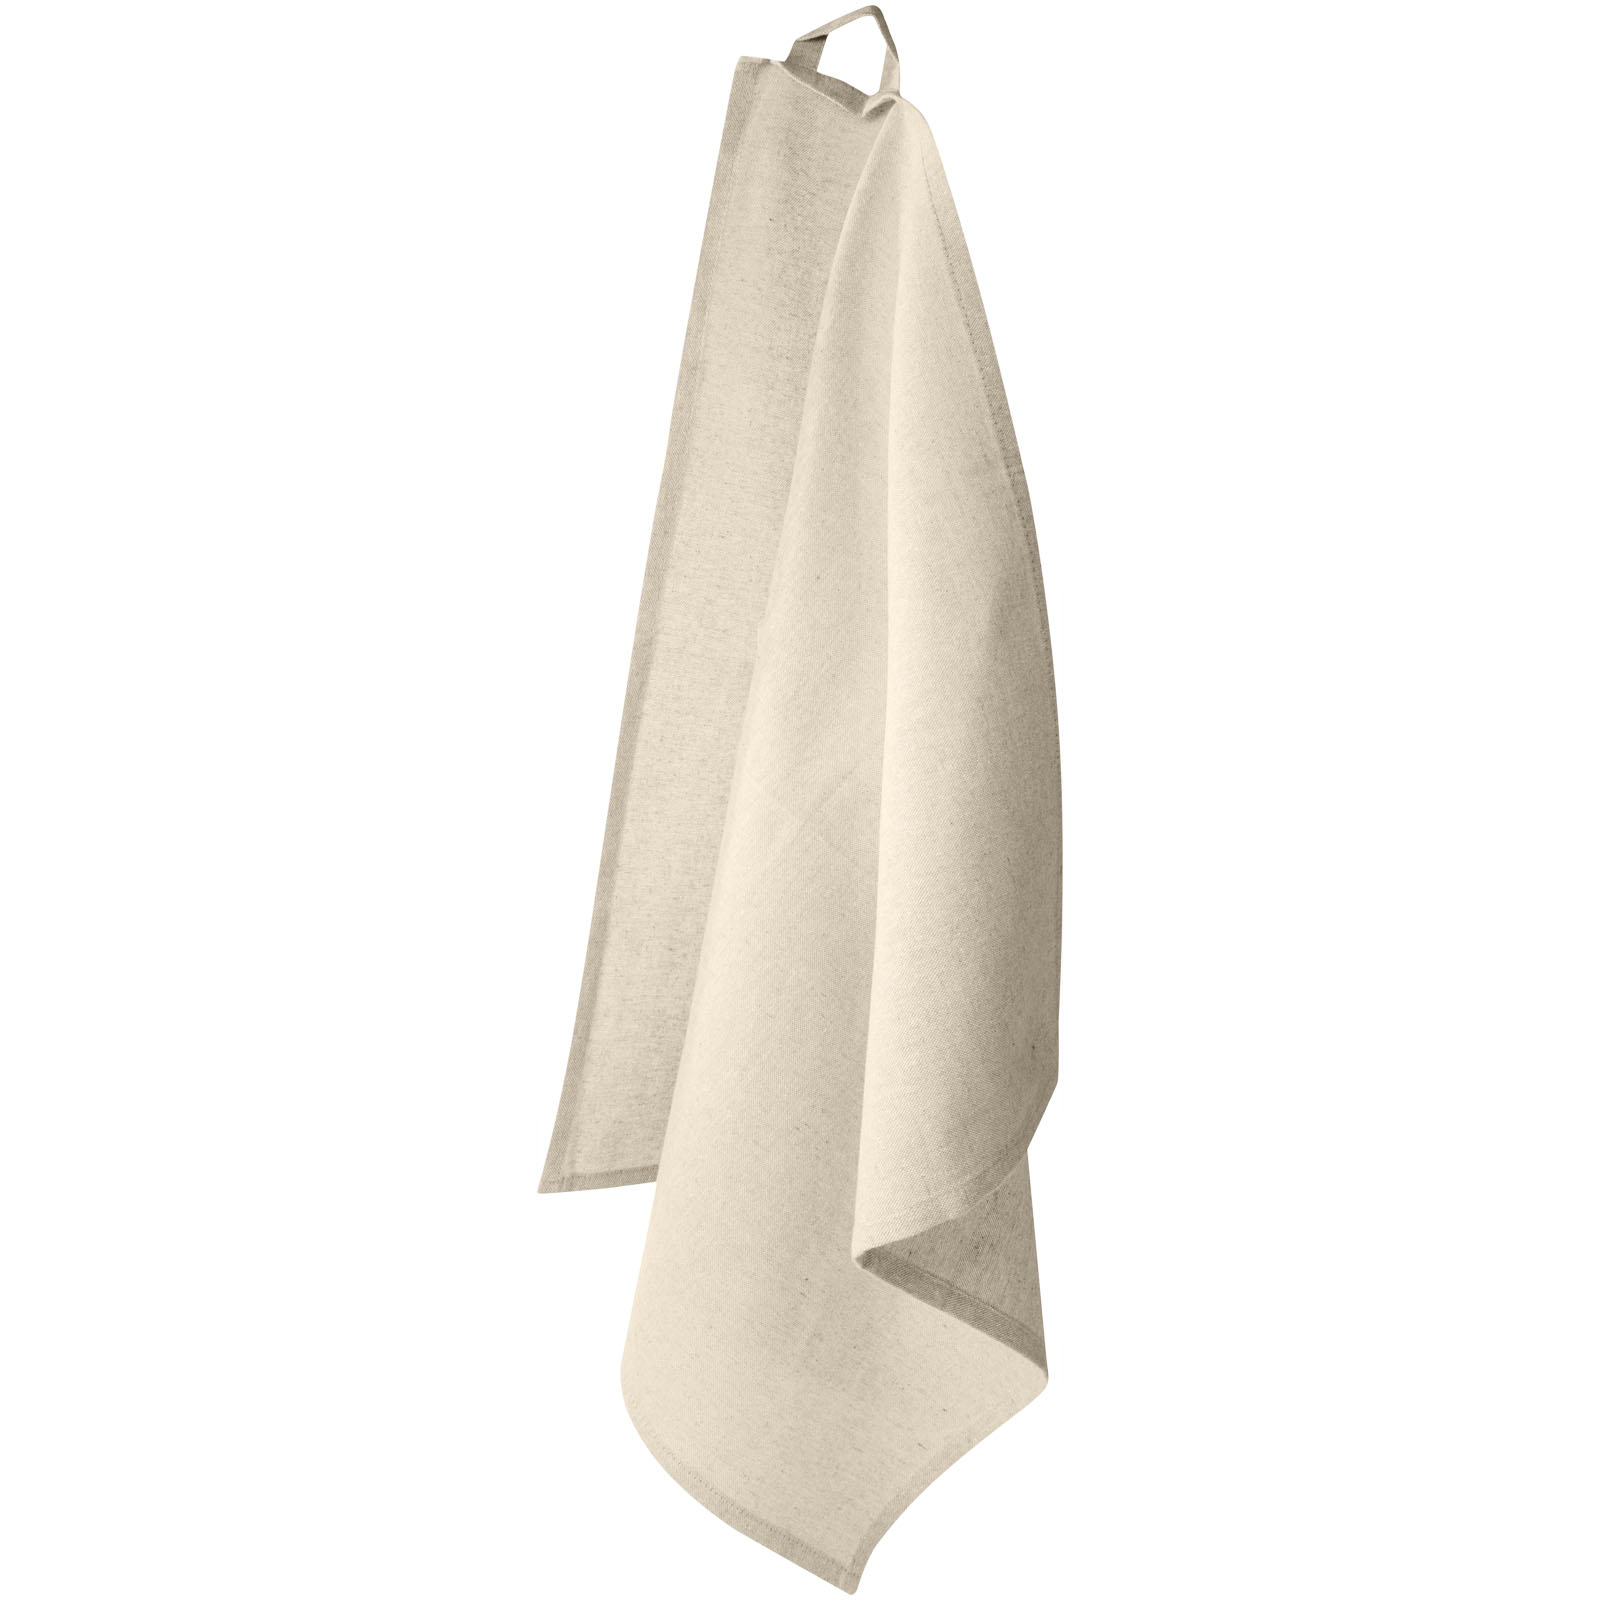 Pheebs Kitchen Towel made from Recycled Cotton Polyester Blend - Laughton